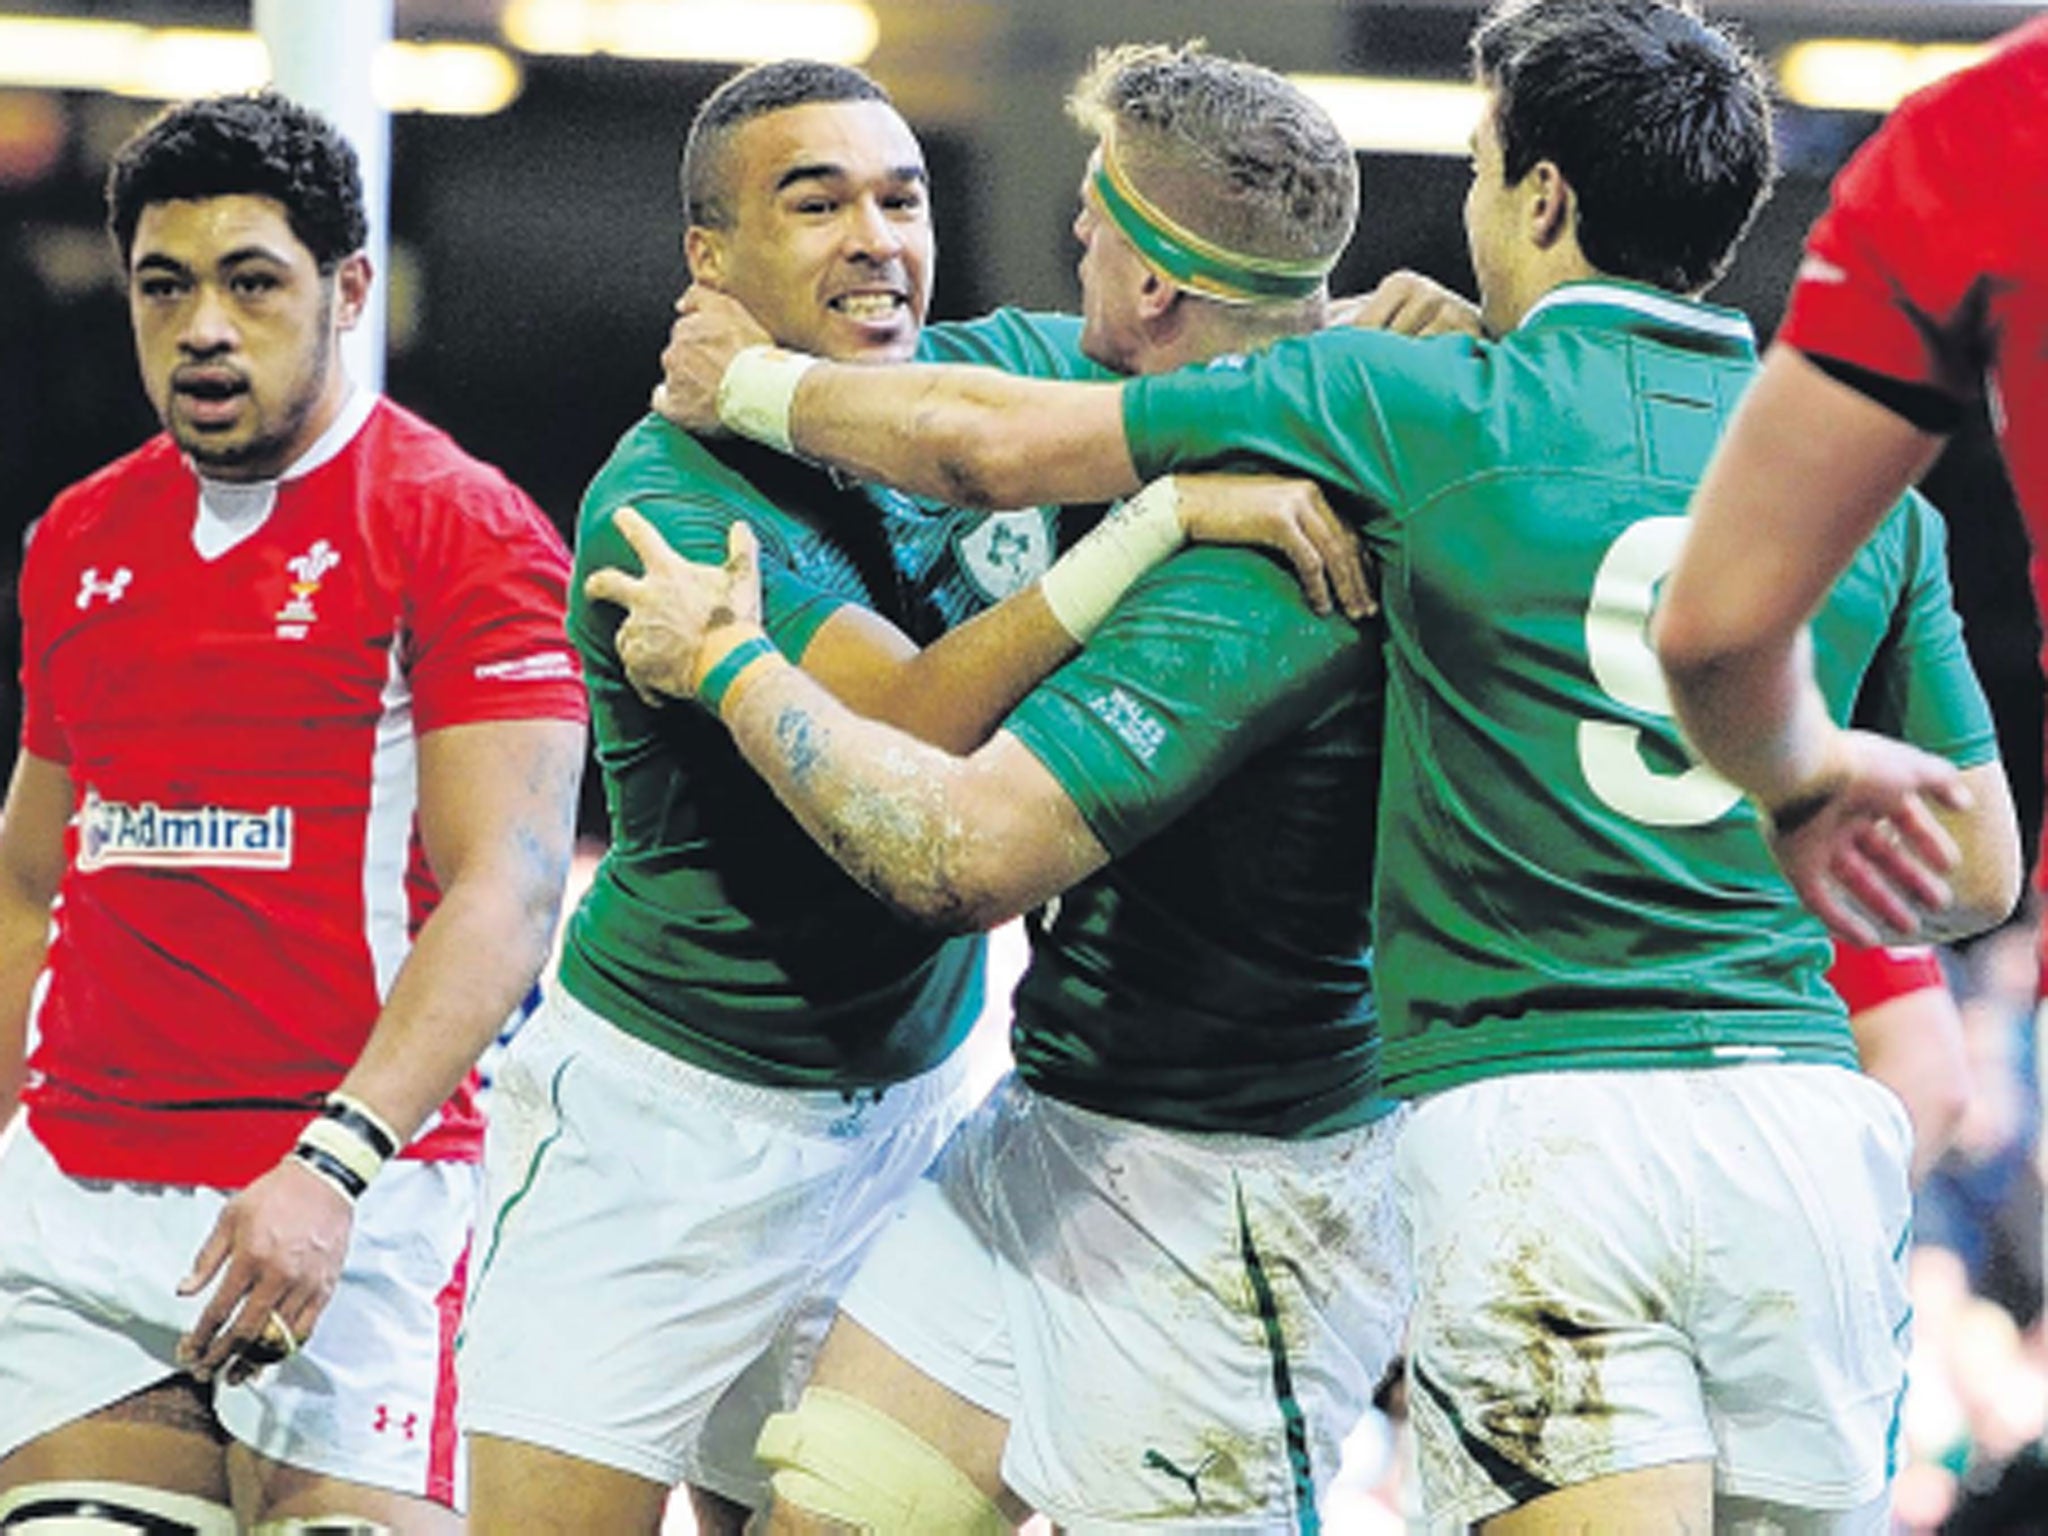 Ireland’s Simon Zebo celebrates his try before setting up the second
with some deft footwork